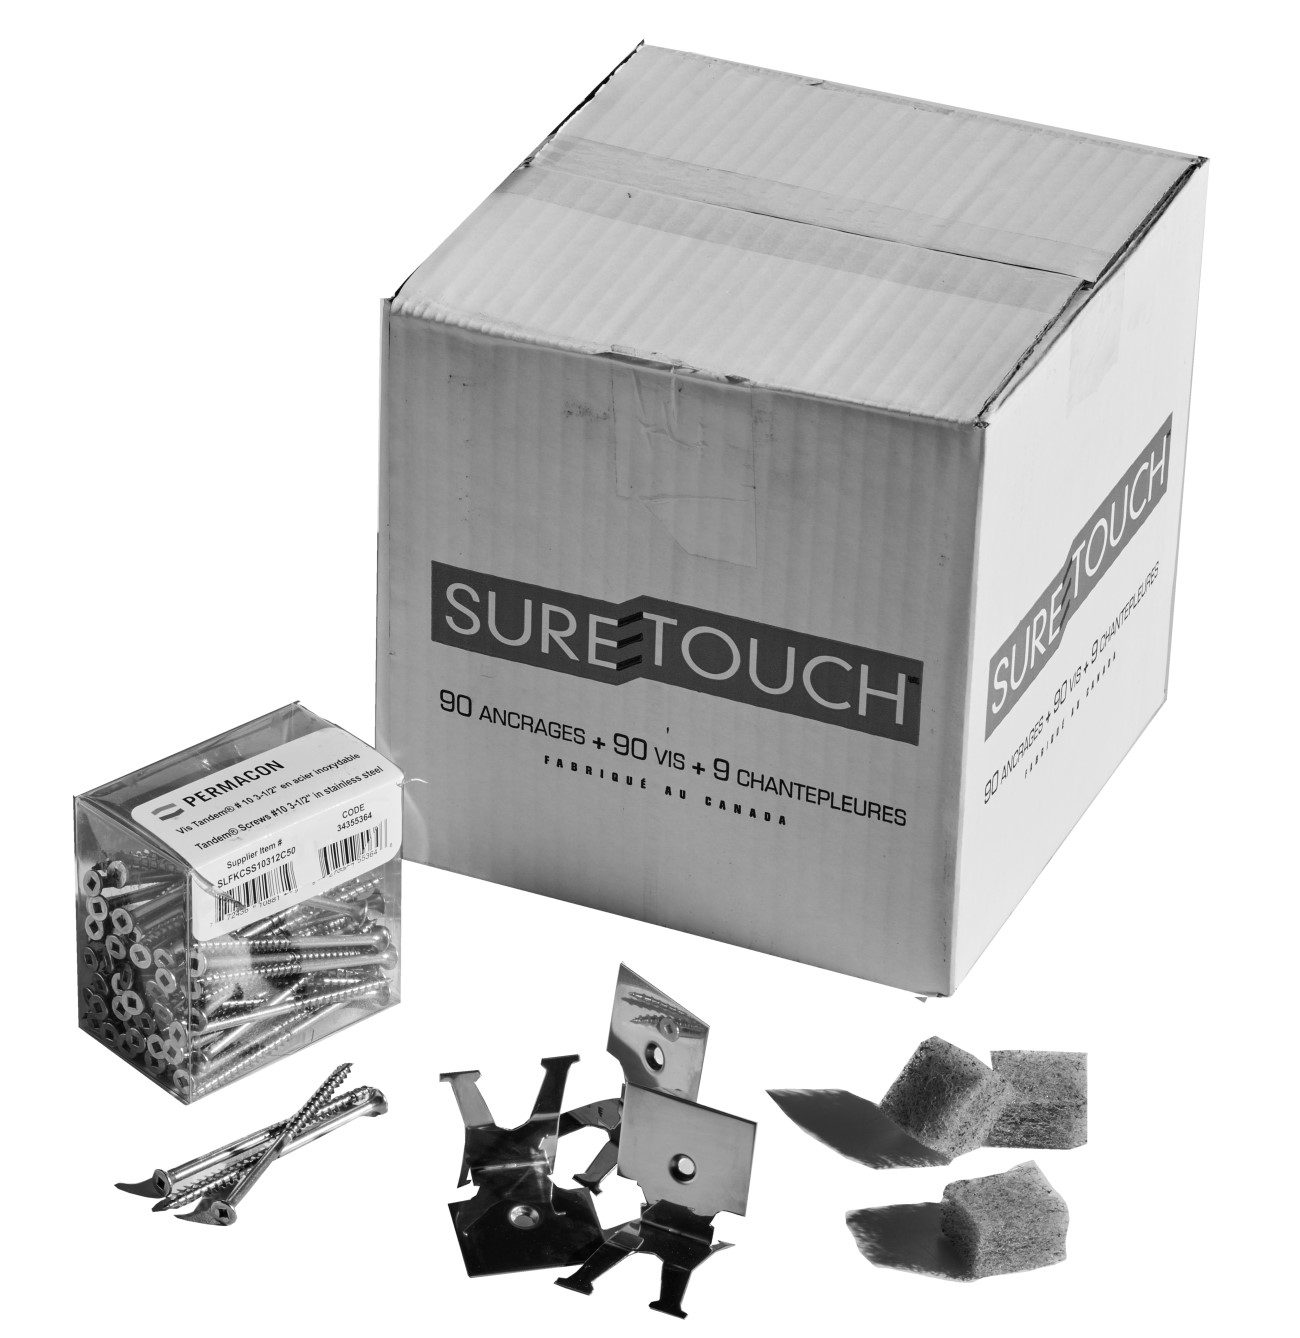 Image Suretouch installation kit / 3in #8 screws (90) / Clips (90) / Weep hole covers (9)